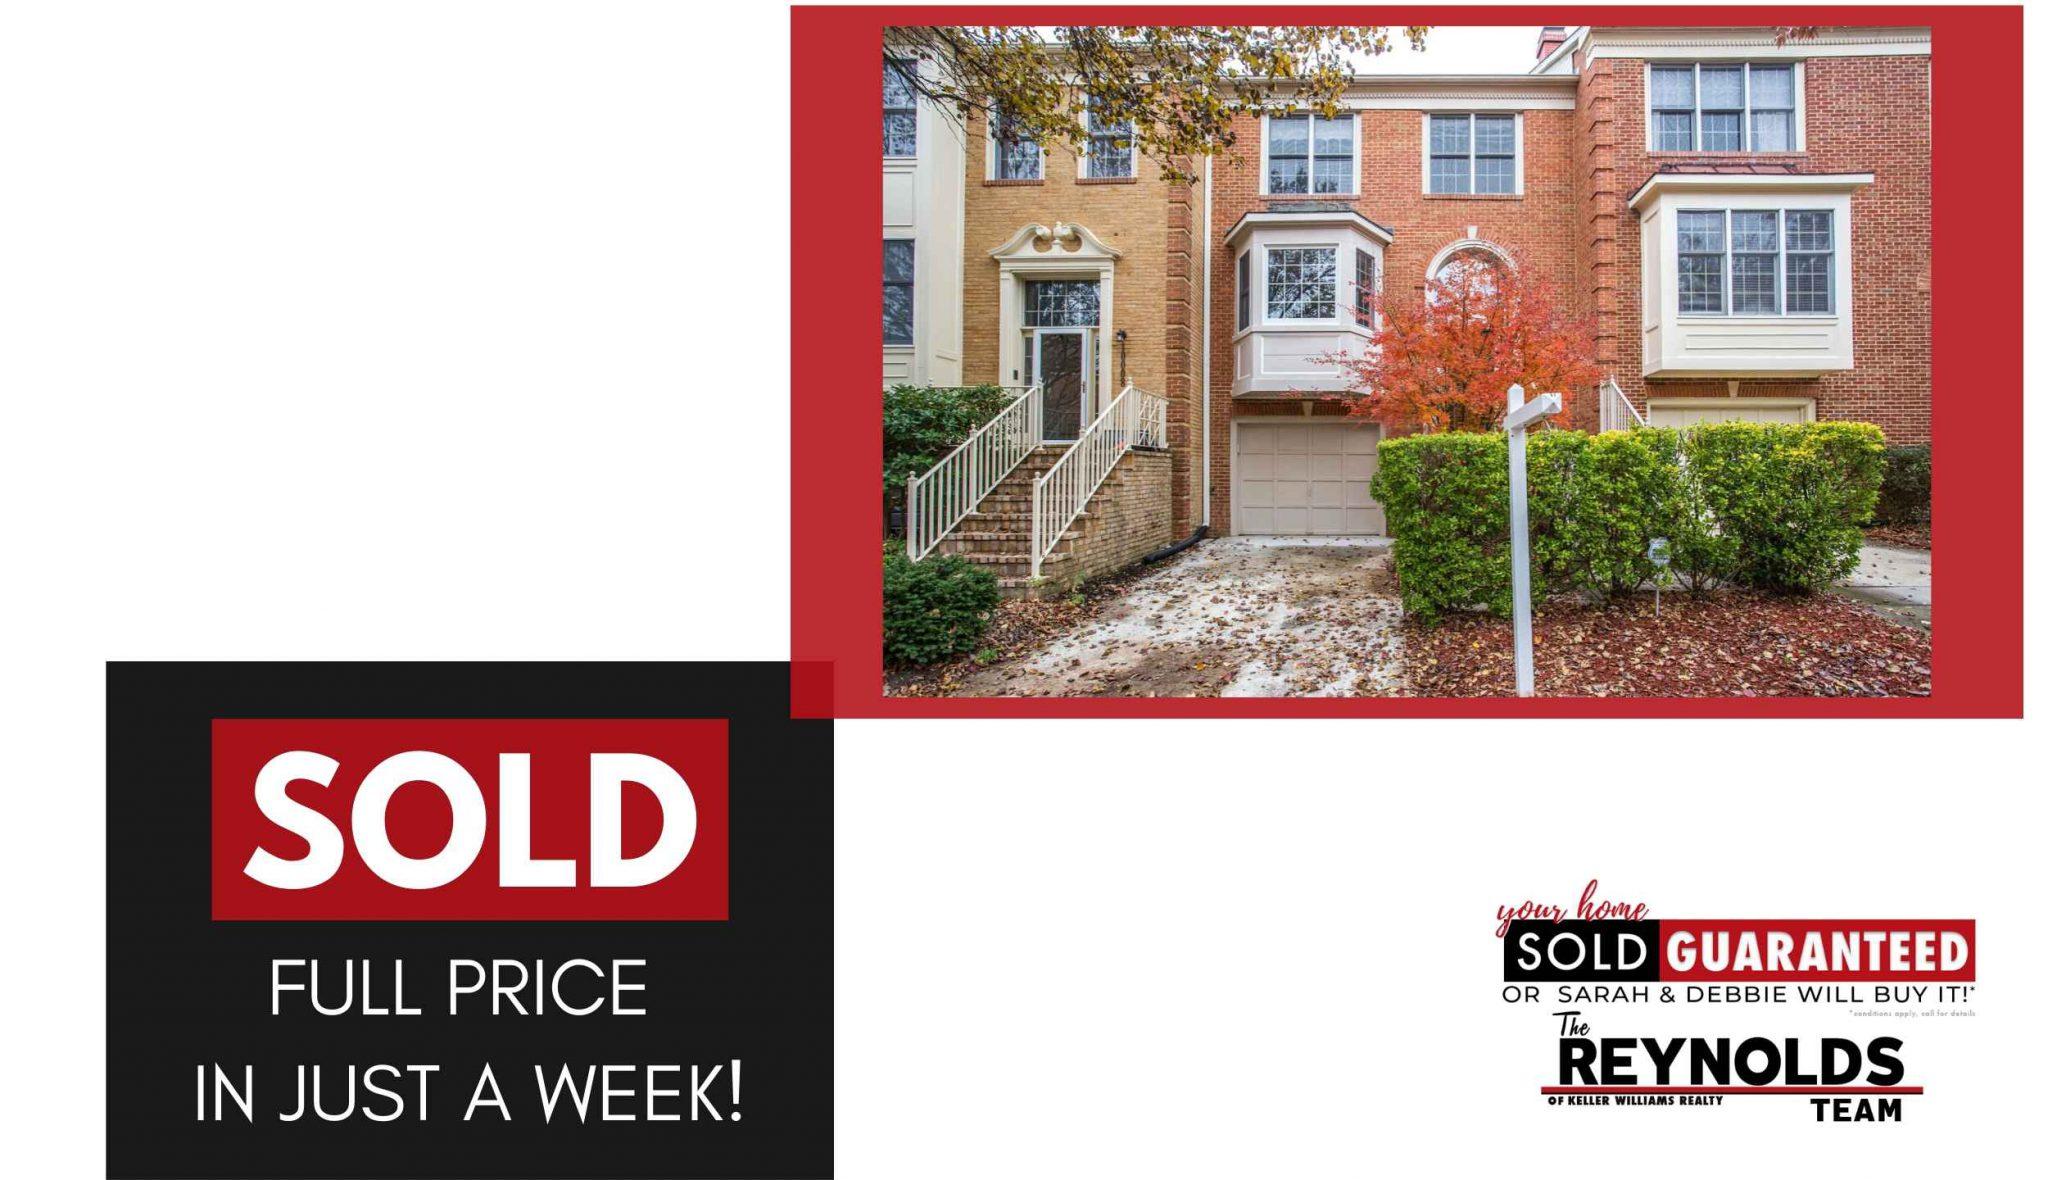 Sold Full Price in Just A Week!